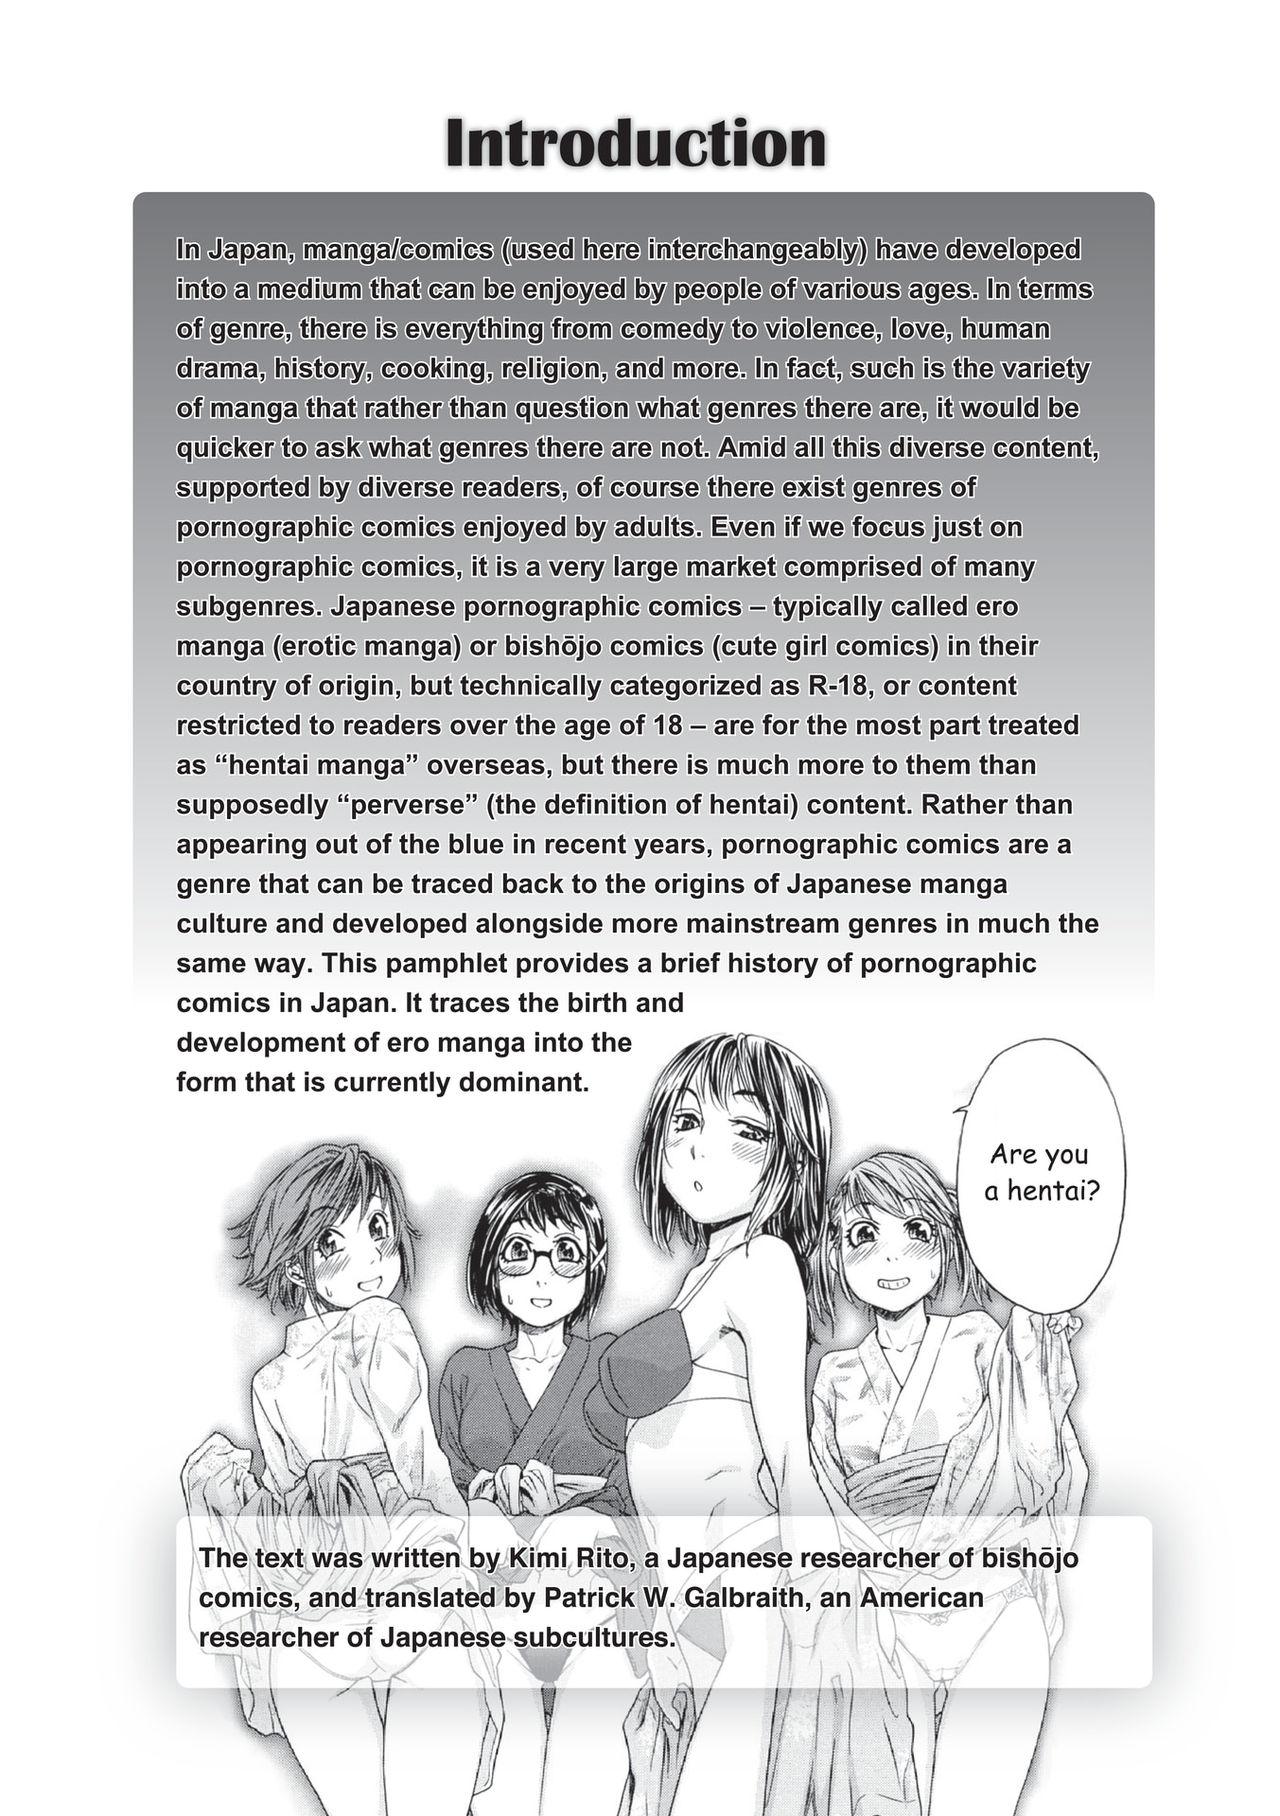 Free Amateur Hentai Manga! A Brief History of Pornographic Comics in Japan Free Amatuer Porn - Page 2